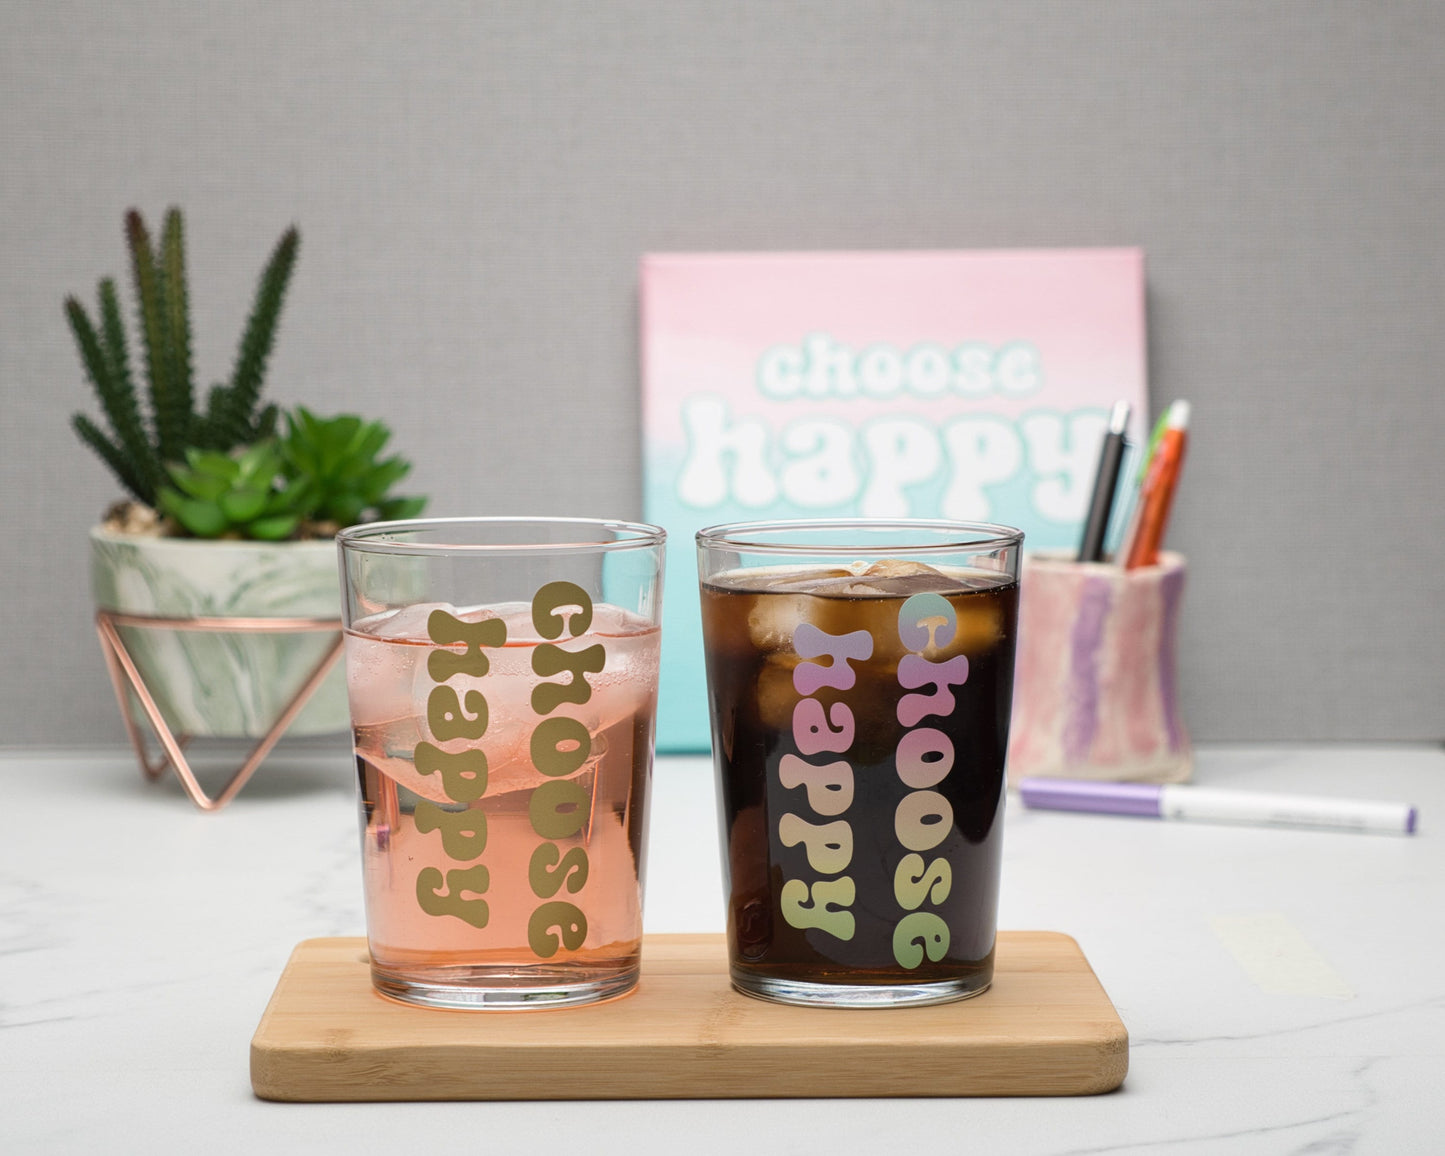 Choose Happy Glass Tumbler, 500ml Highball Glass, Everyday Glass, Self Care Inspirational Quotes, Pastel Rainbow, Pearl, Colour Changing